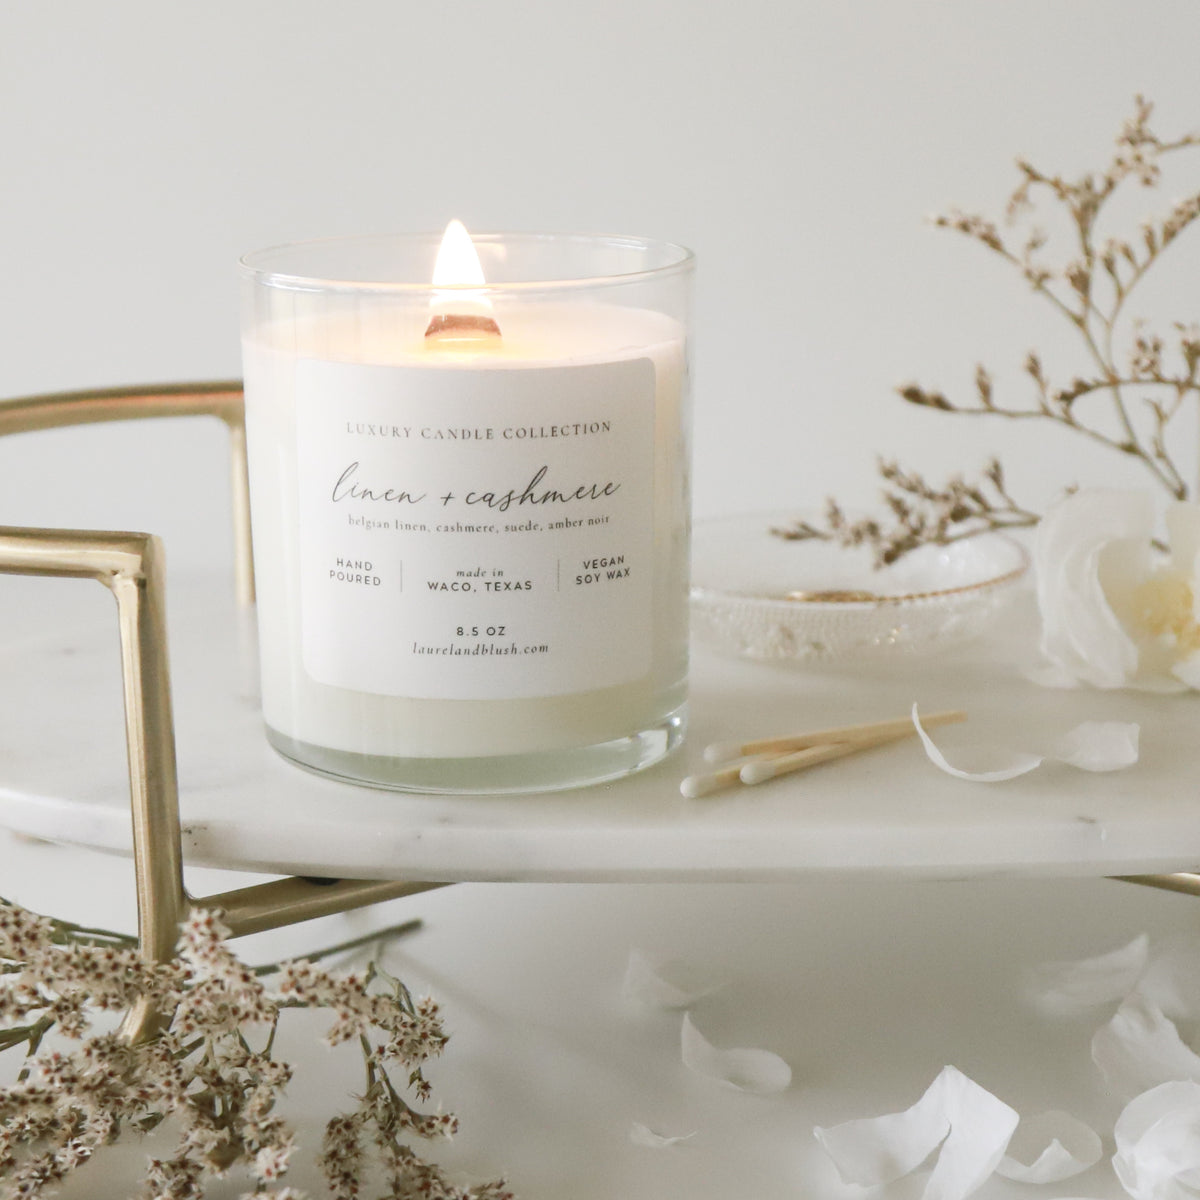 Linen and Cashmere Candle